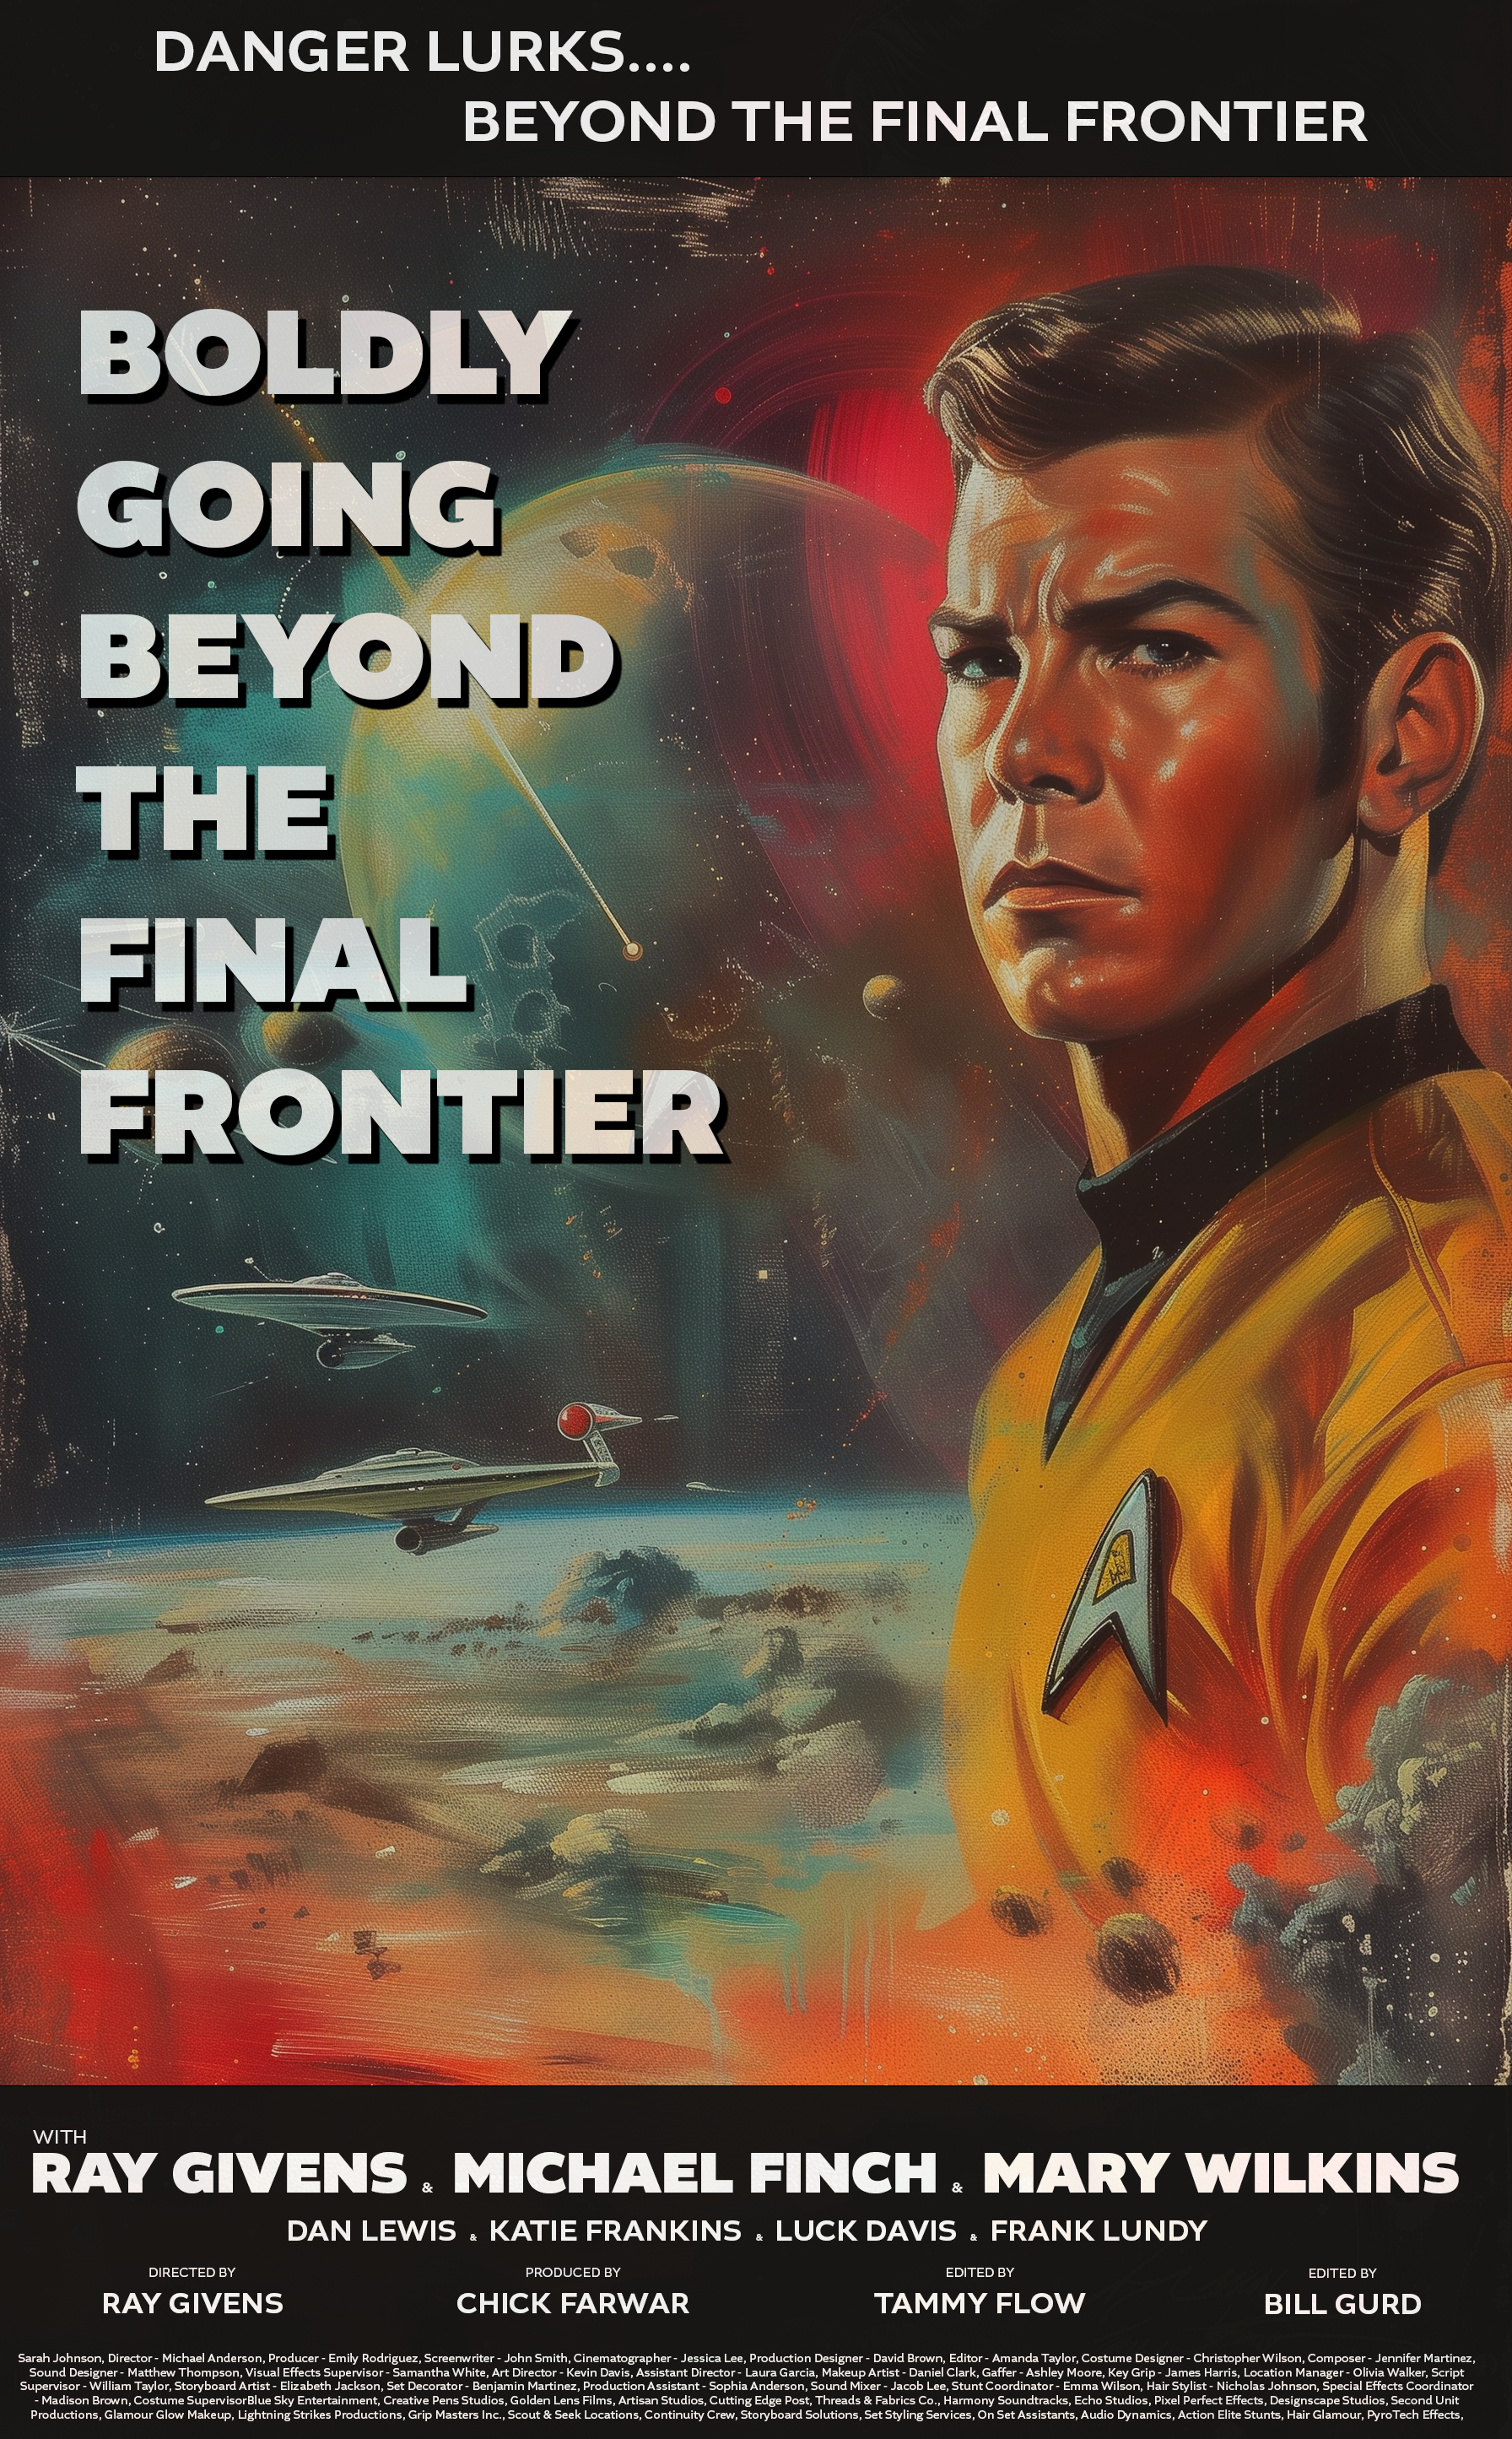 Name:  Beyond the Final Frontier.png
Views: 154
Size:  8.19 MB